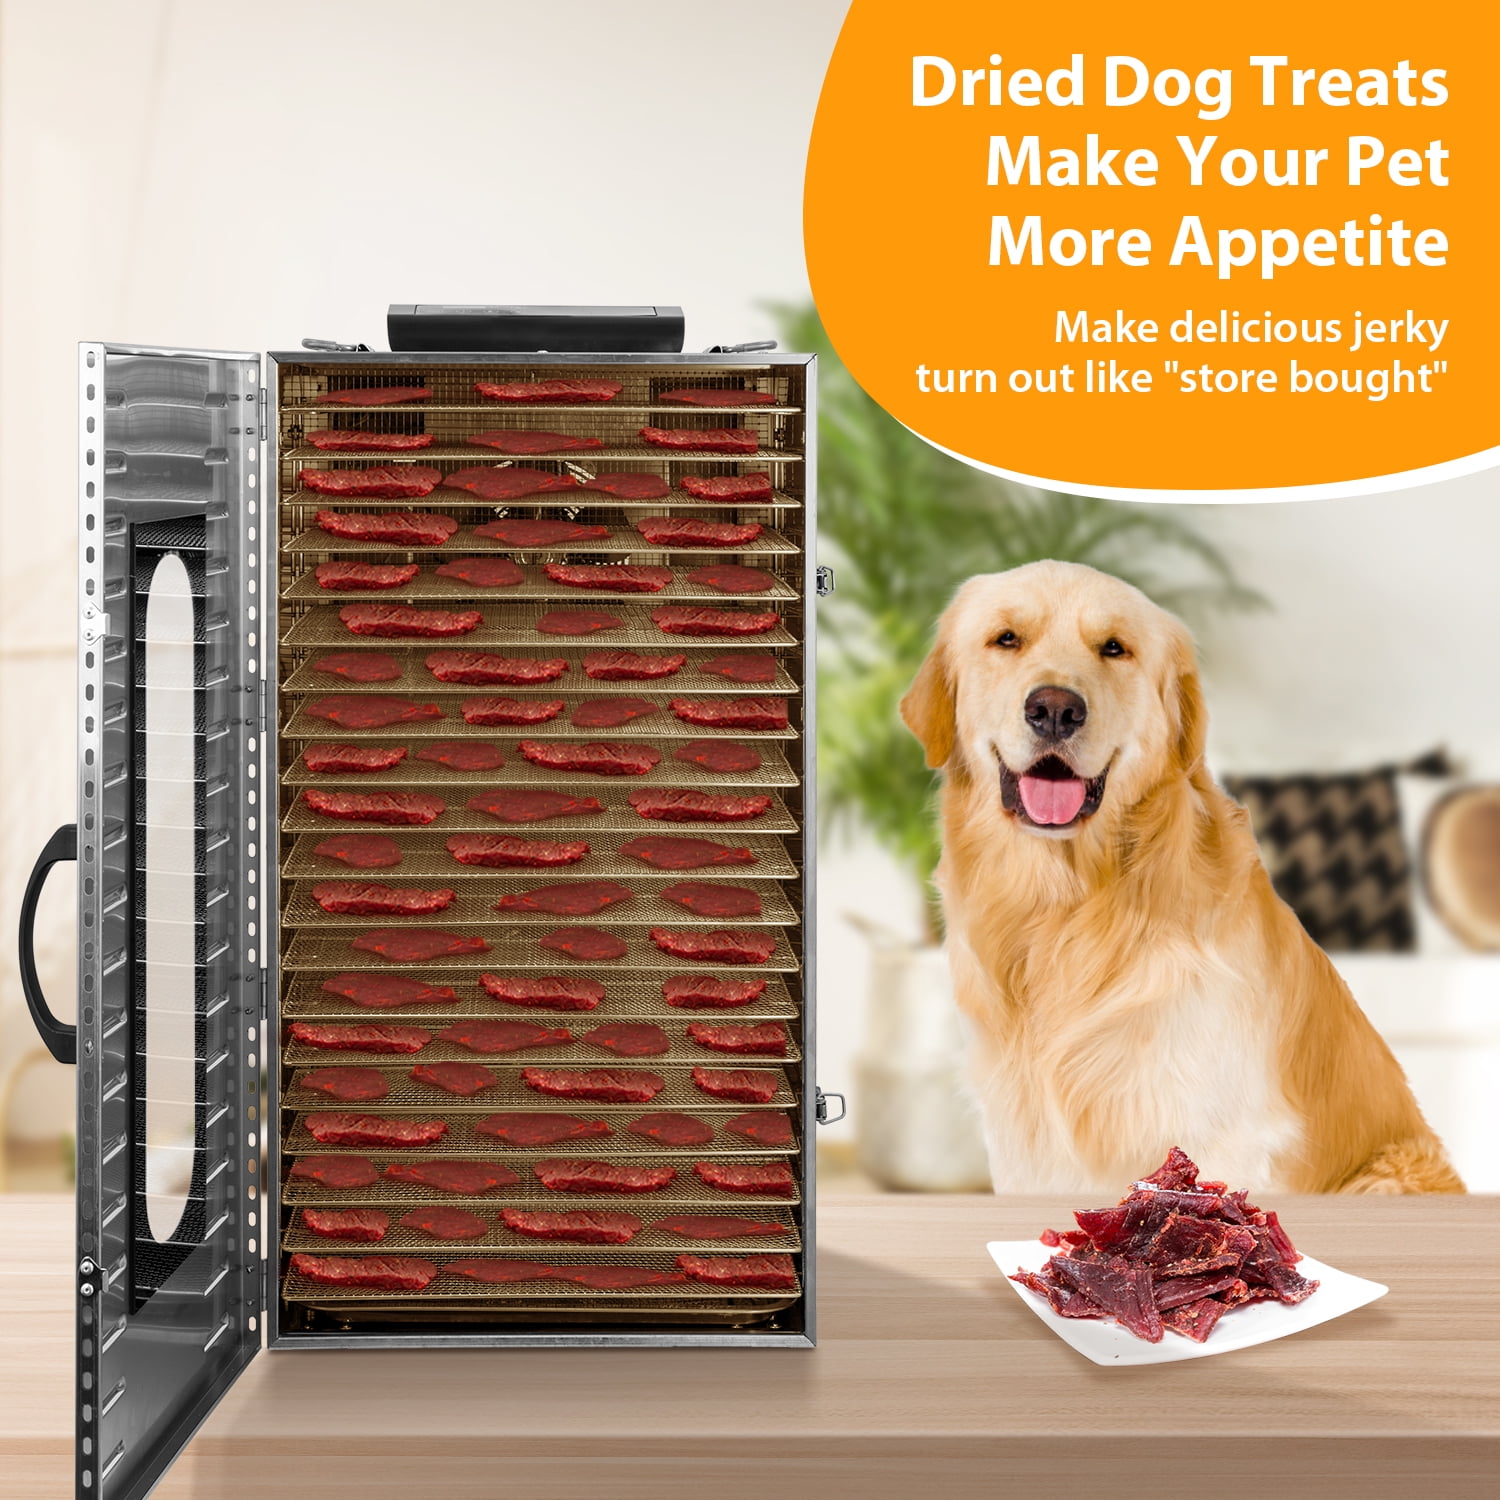 Large Food Dehydrator Machine with 20 Trays for Jerky, Fruits, Vegetables  Dehydrating, Make Dog Treats - Commercial Grade Electric Dehydrator 